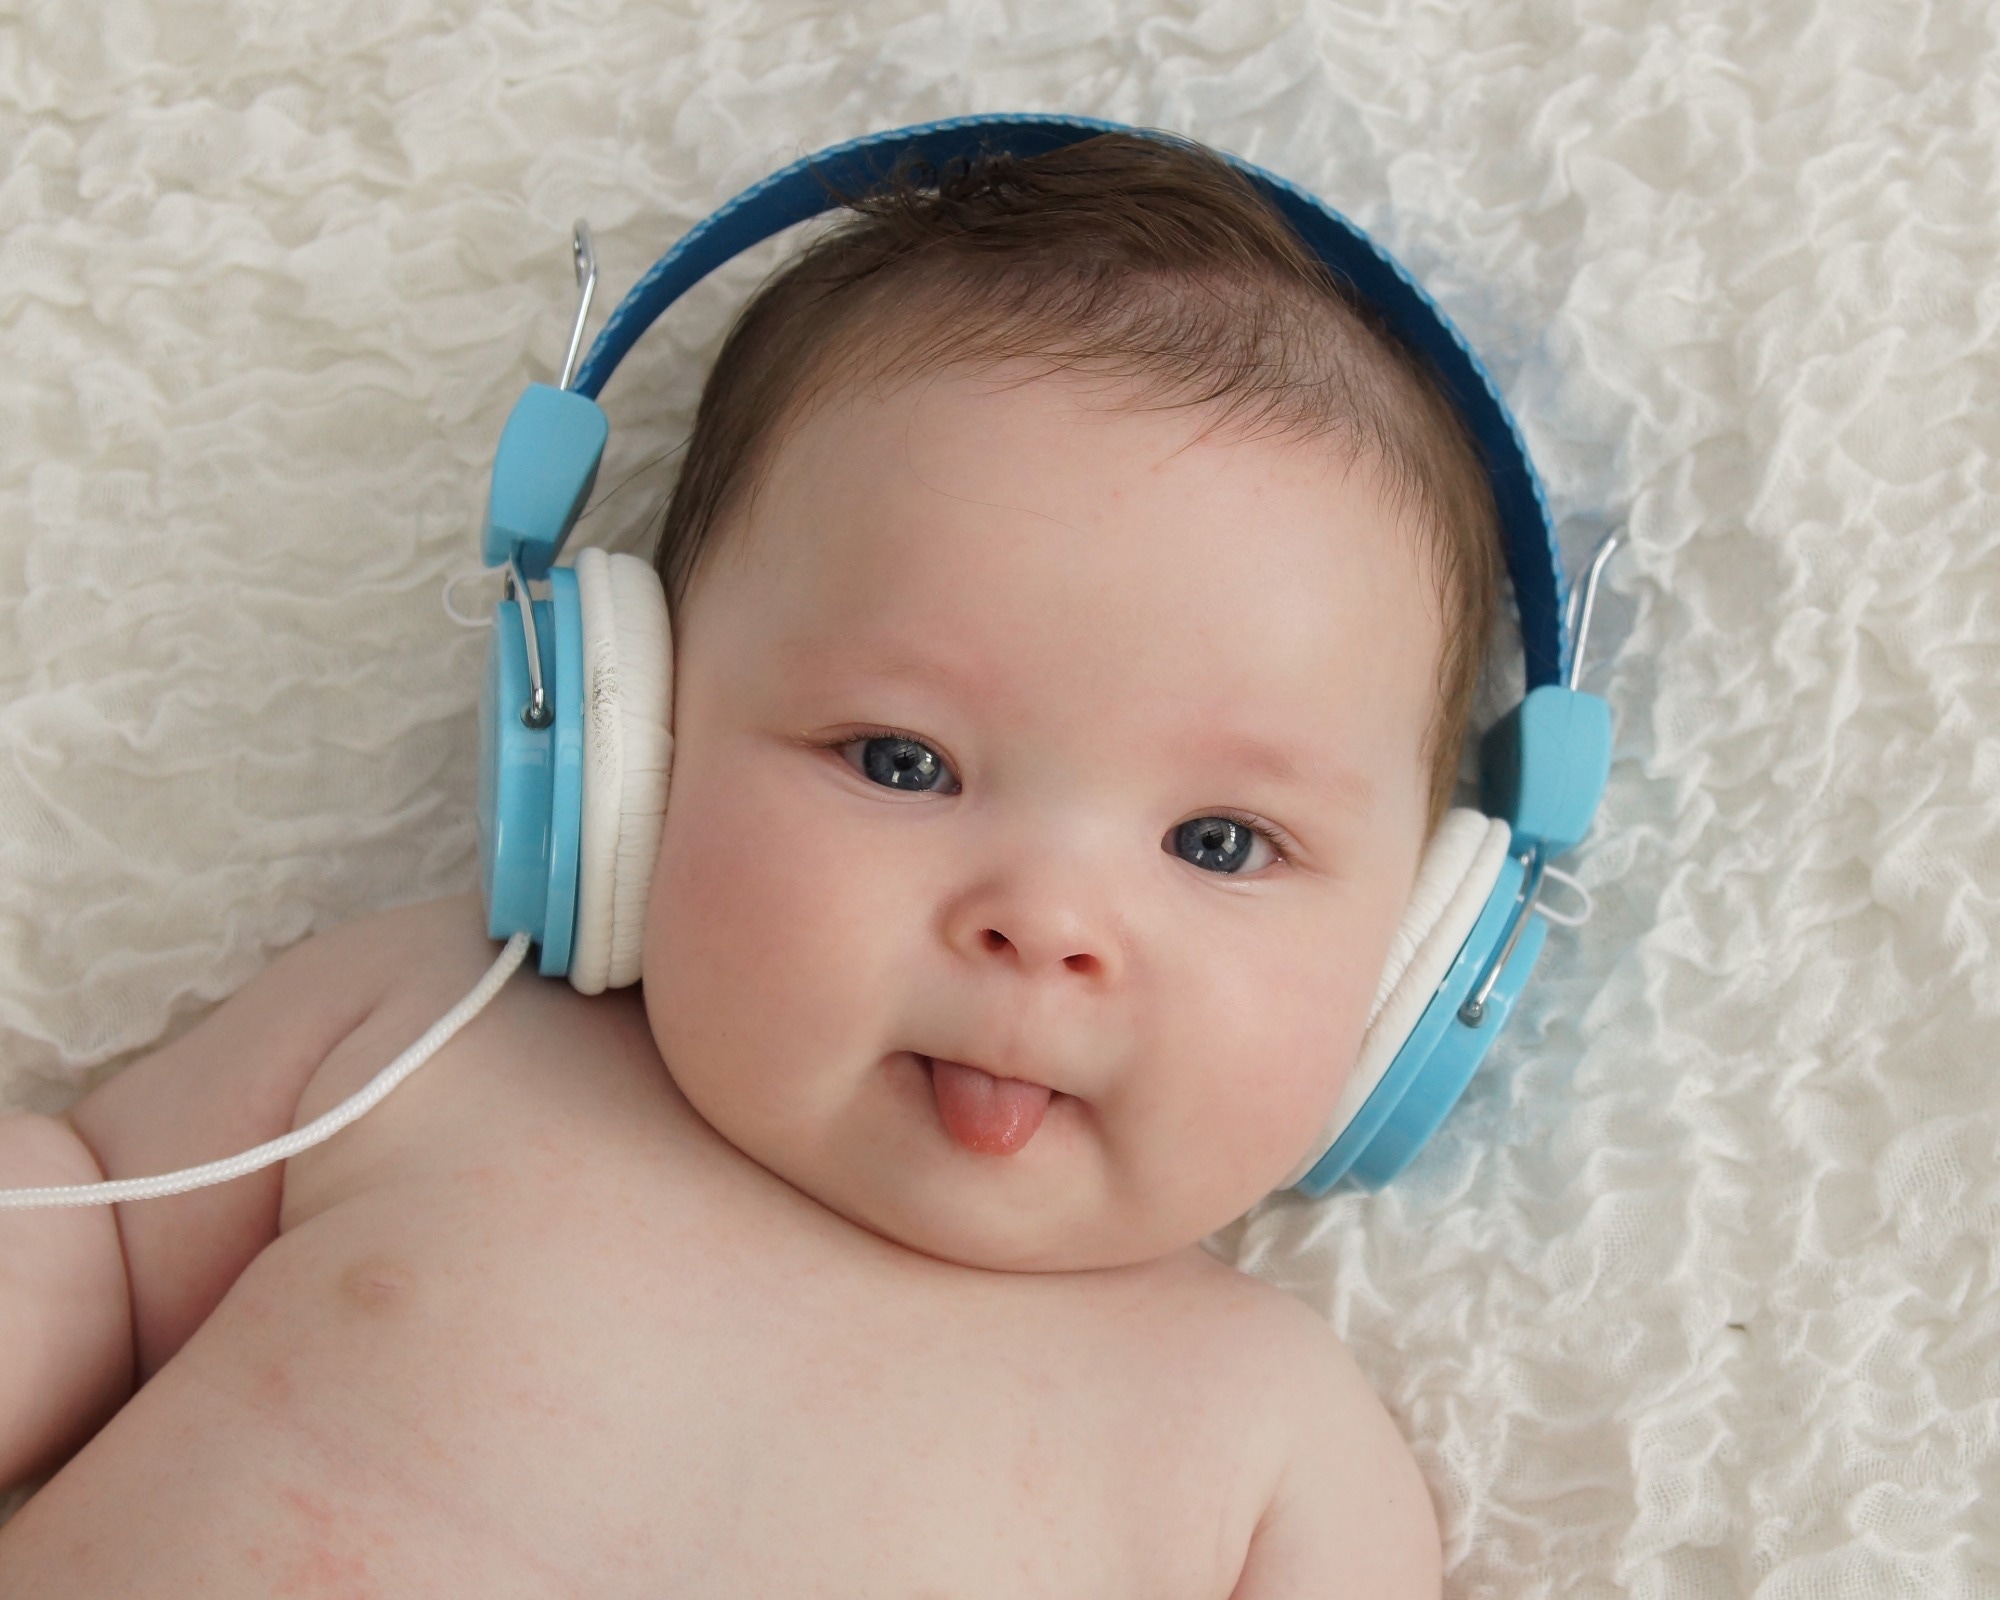 Study: Early maturation of sound duration processing in the infant’s brain. Image Credit: Sarahbean/Shutterstock/com